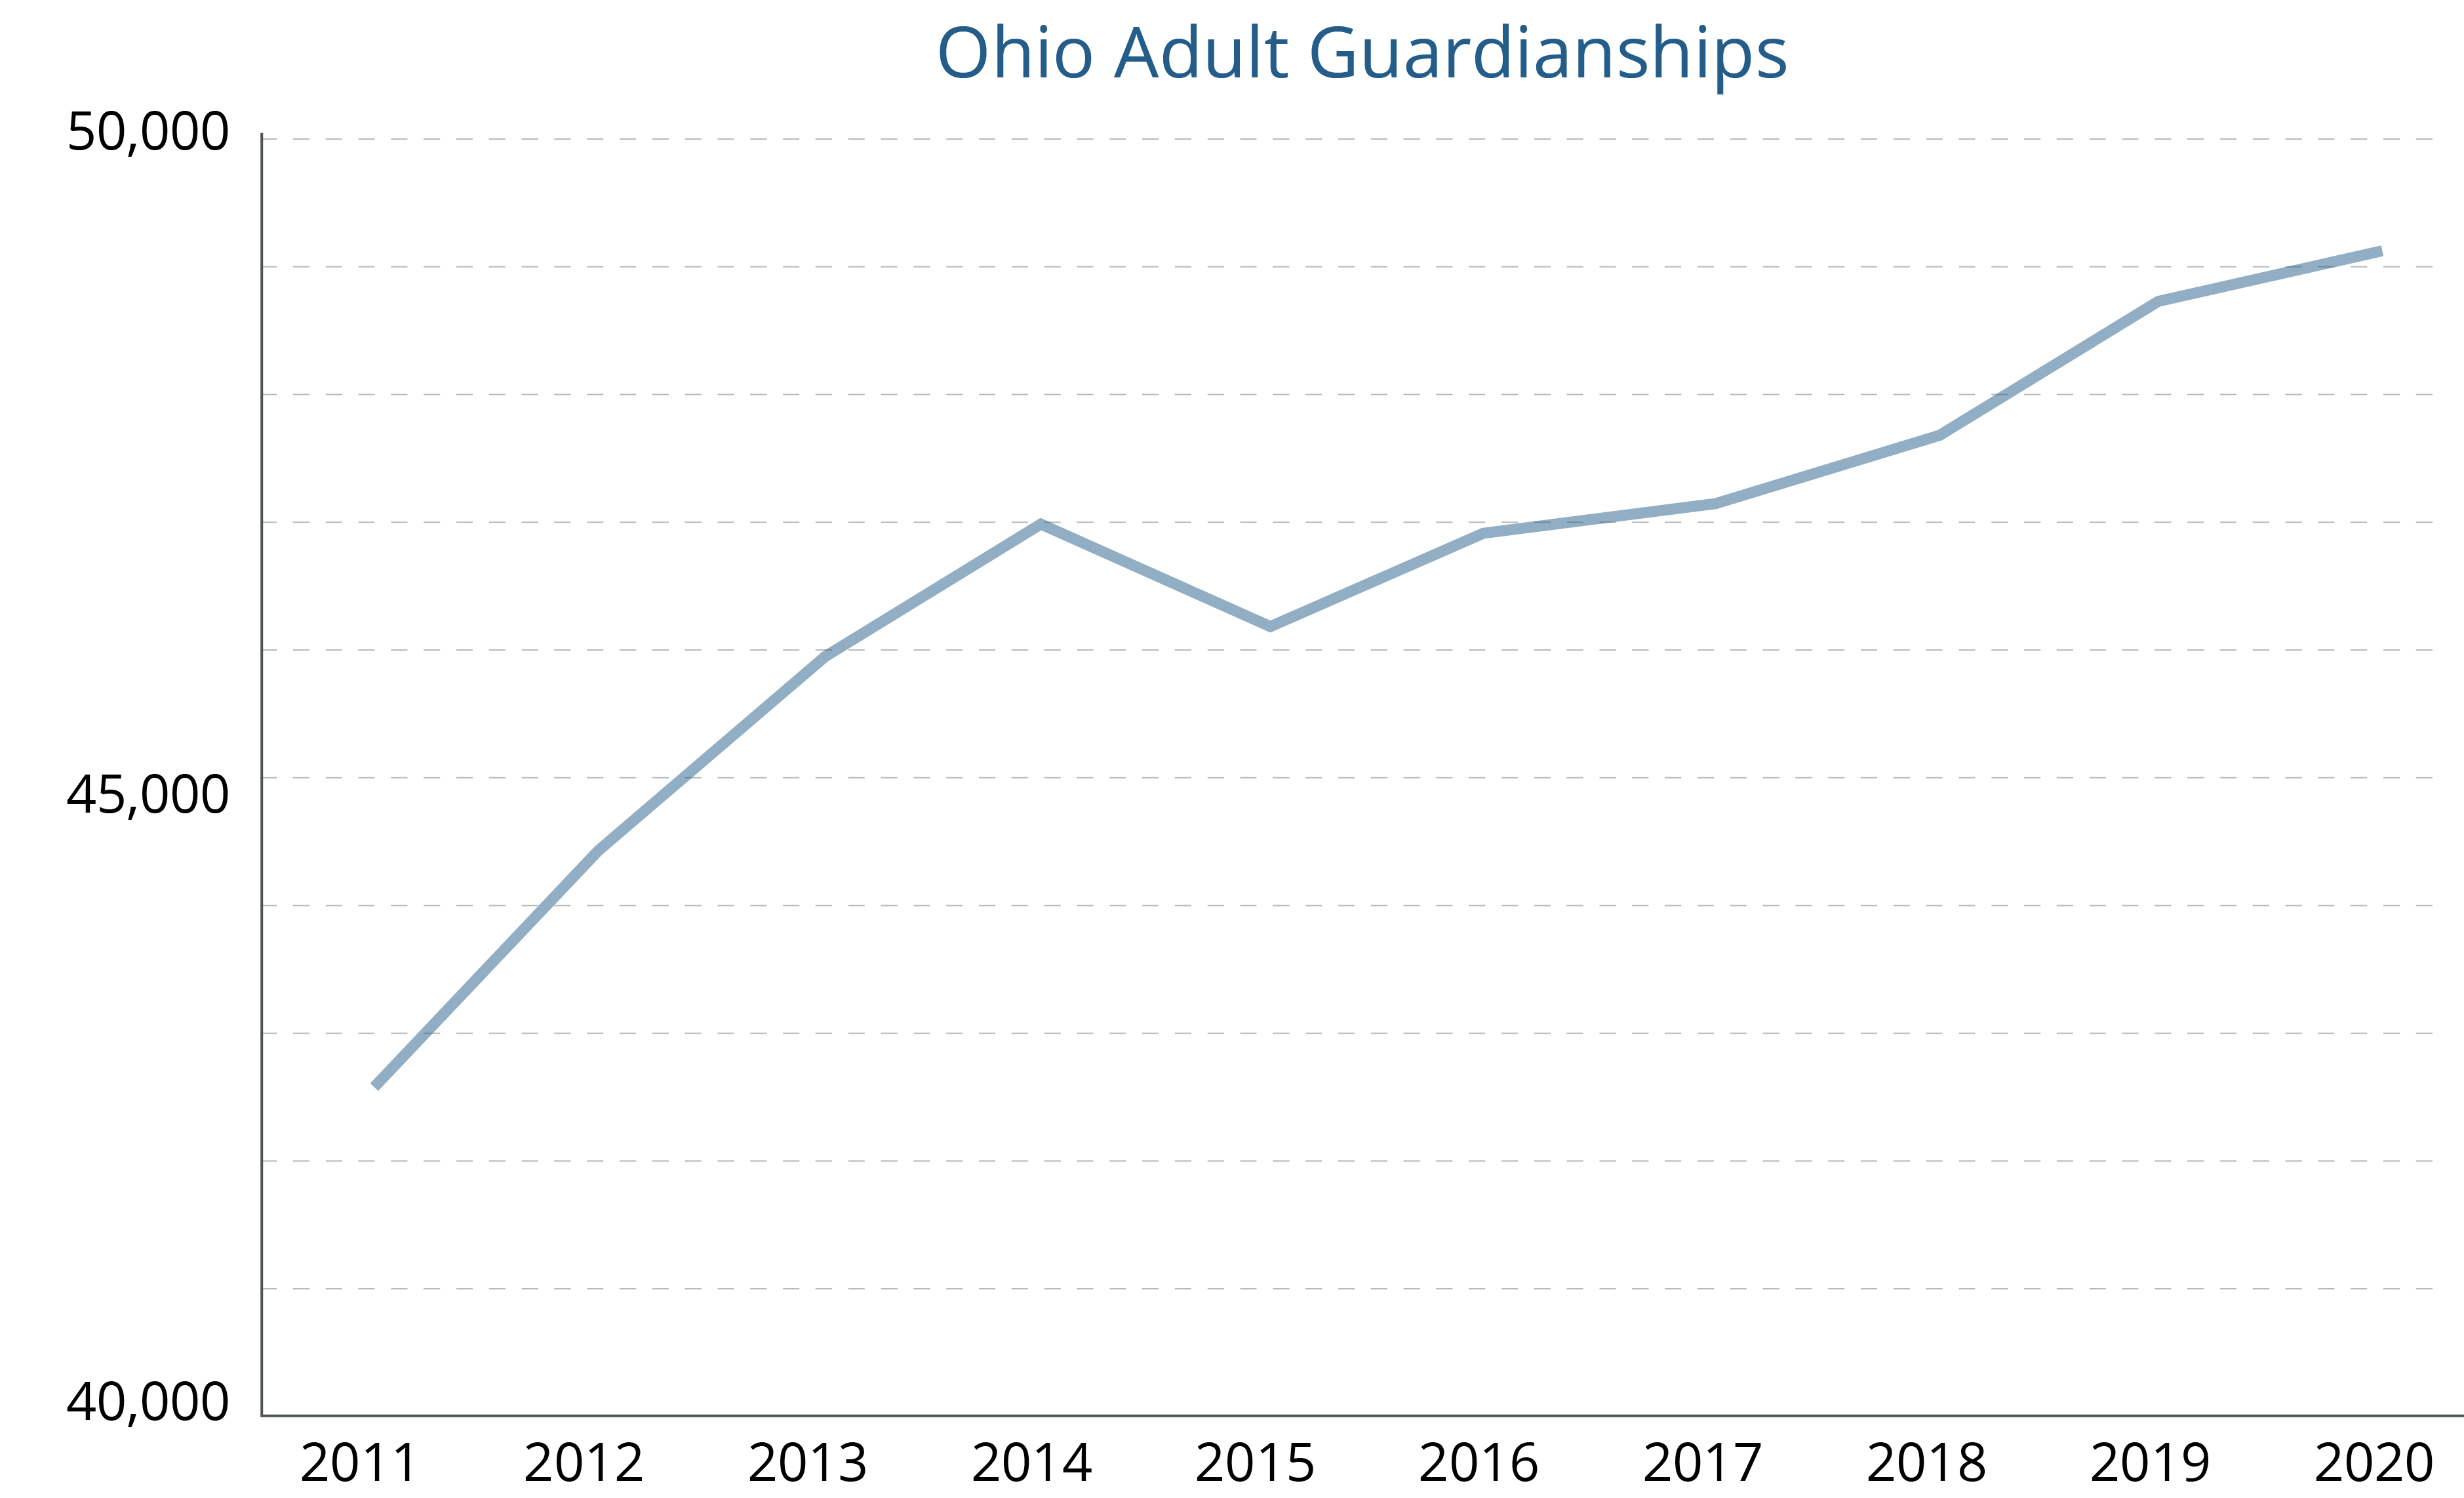 Line graph representing the steady increase in Ohio adult guardianships from 2011 through 2020